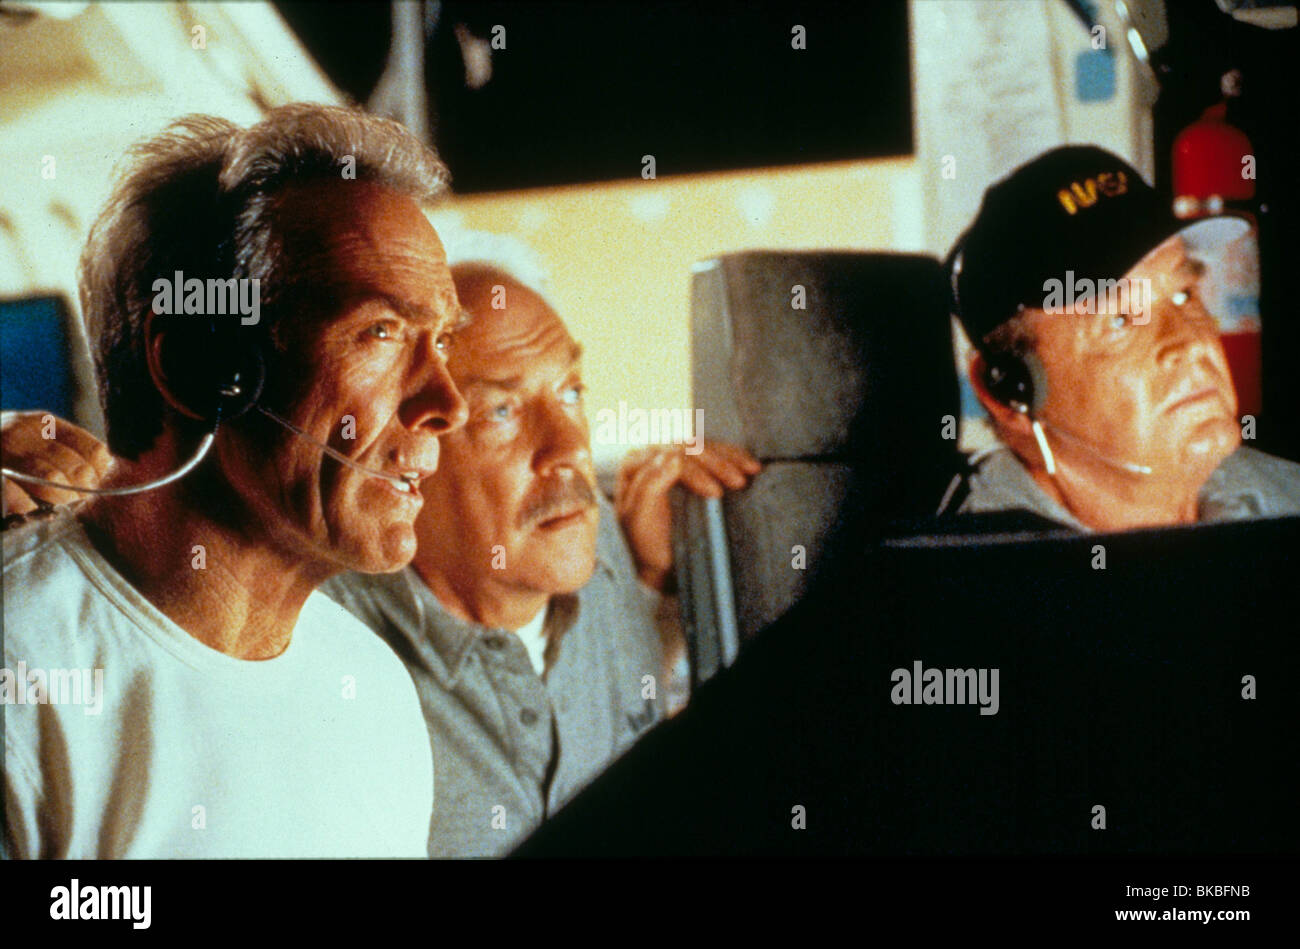 SPACE COWBOY (2000) Clint Eastwood, Donald Sutherland, James Garner SCOW 077 Foto Stock